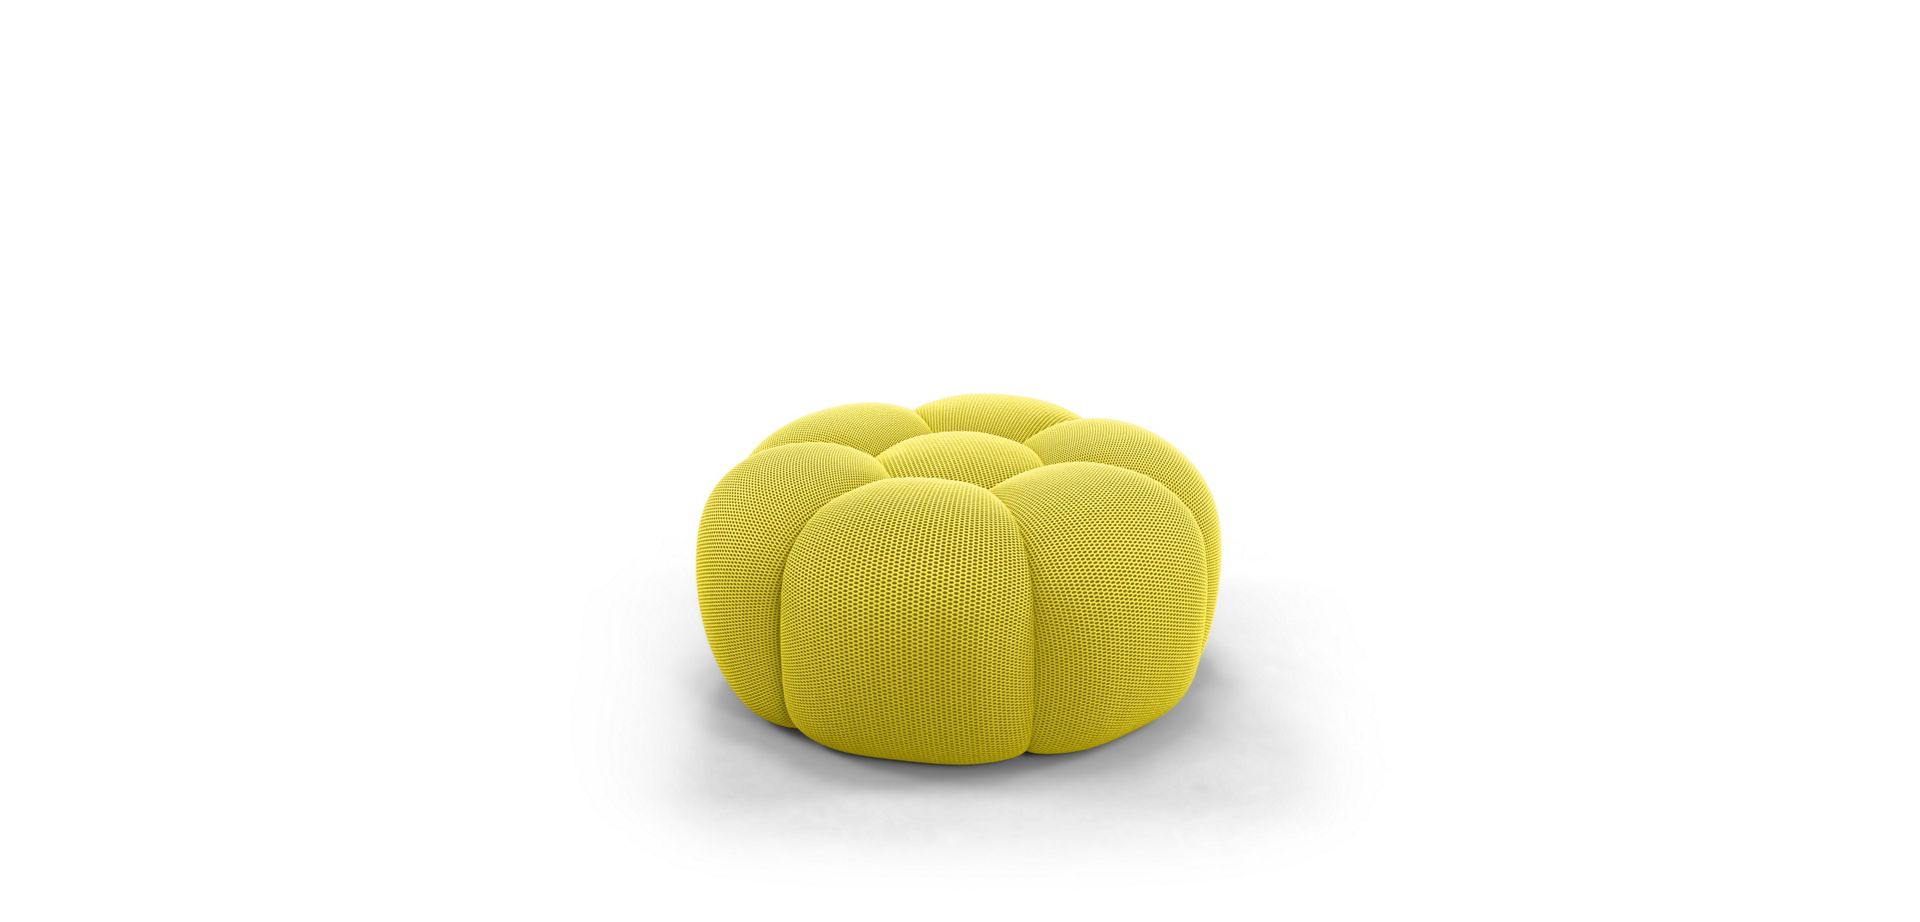 large 3-seat sofa - techno 3D image number 14